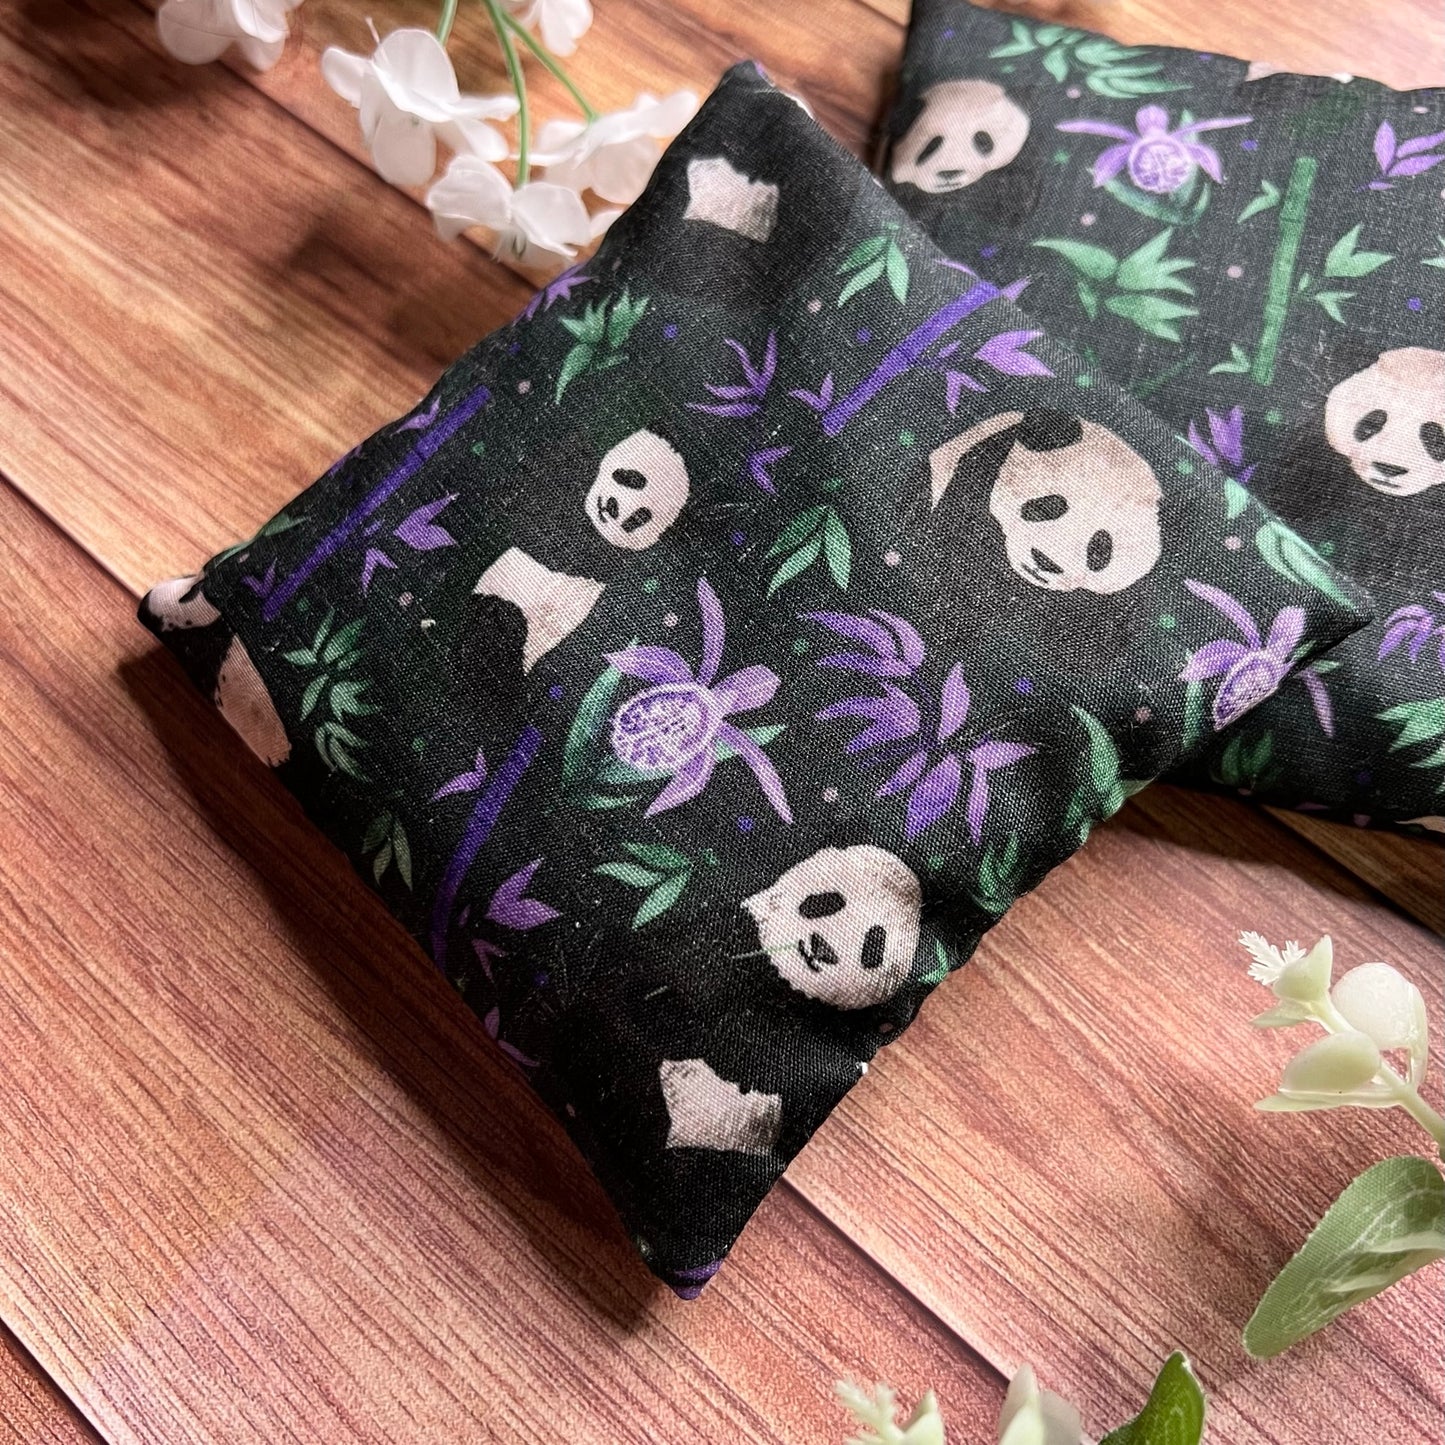 this hand warmers gift set is an ideal gift for a panda lover, with a matching pair of hand warmers that are lavender scented